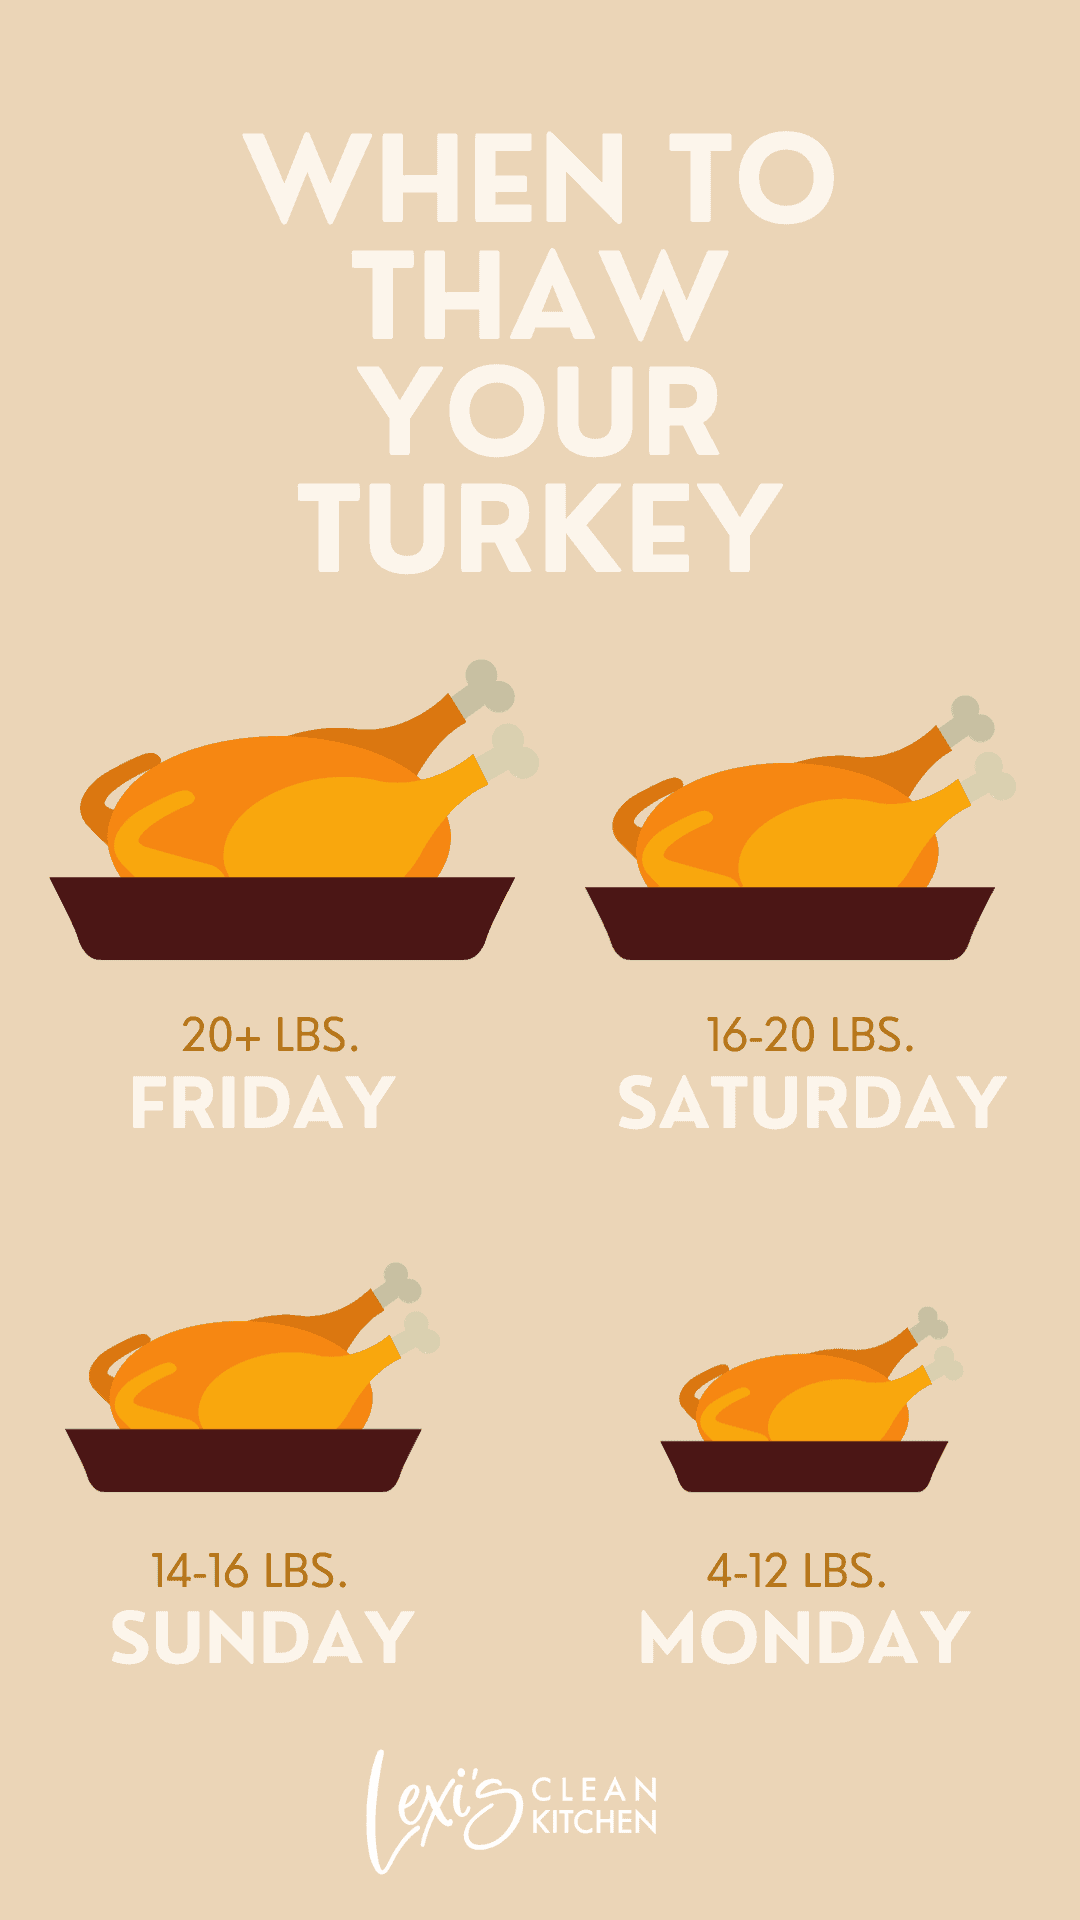 When to start thawing your turkey infographic